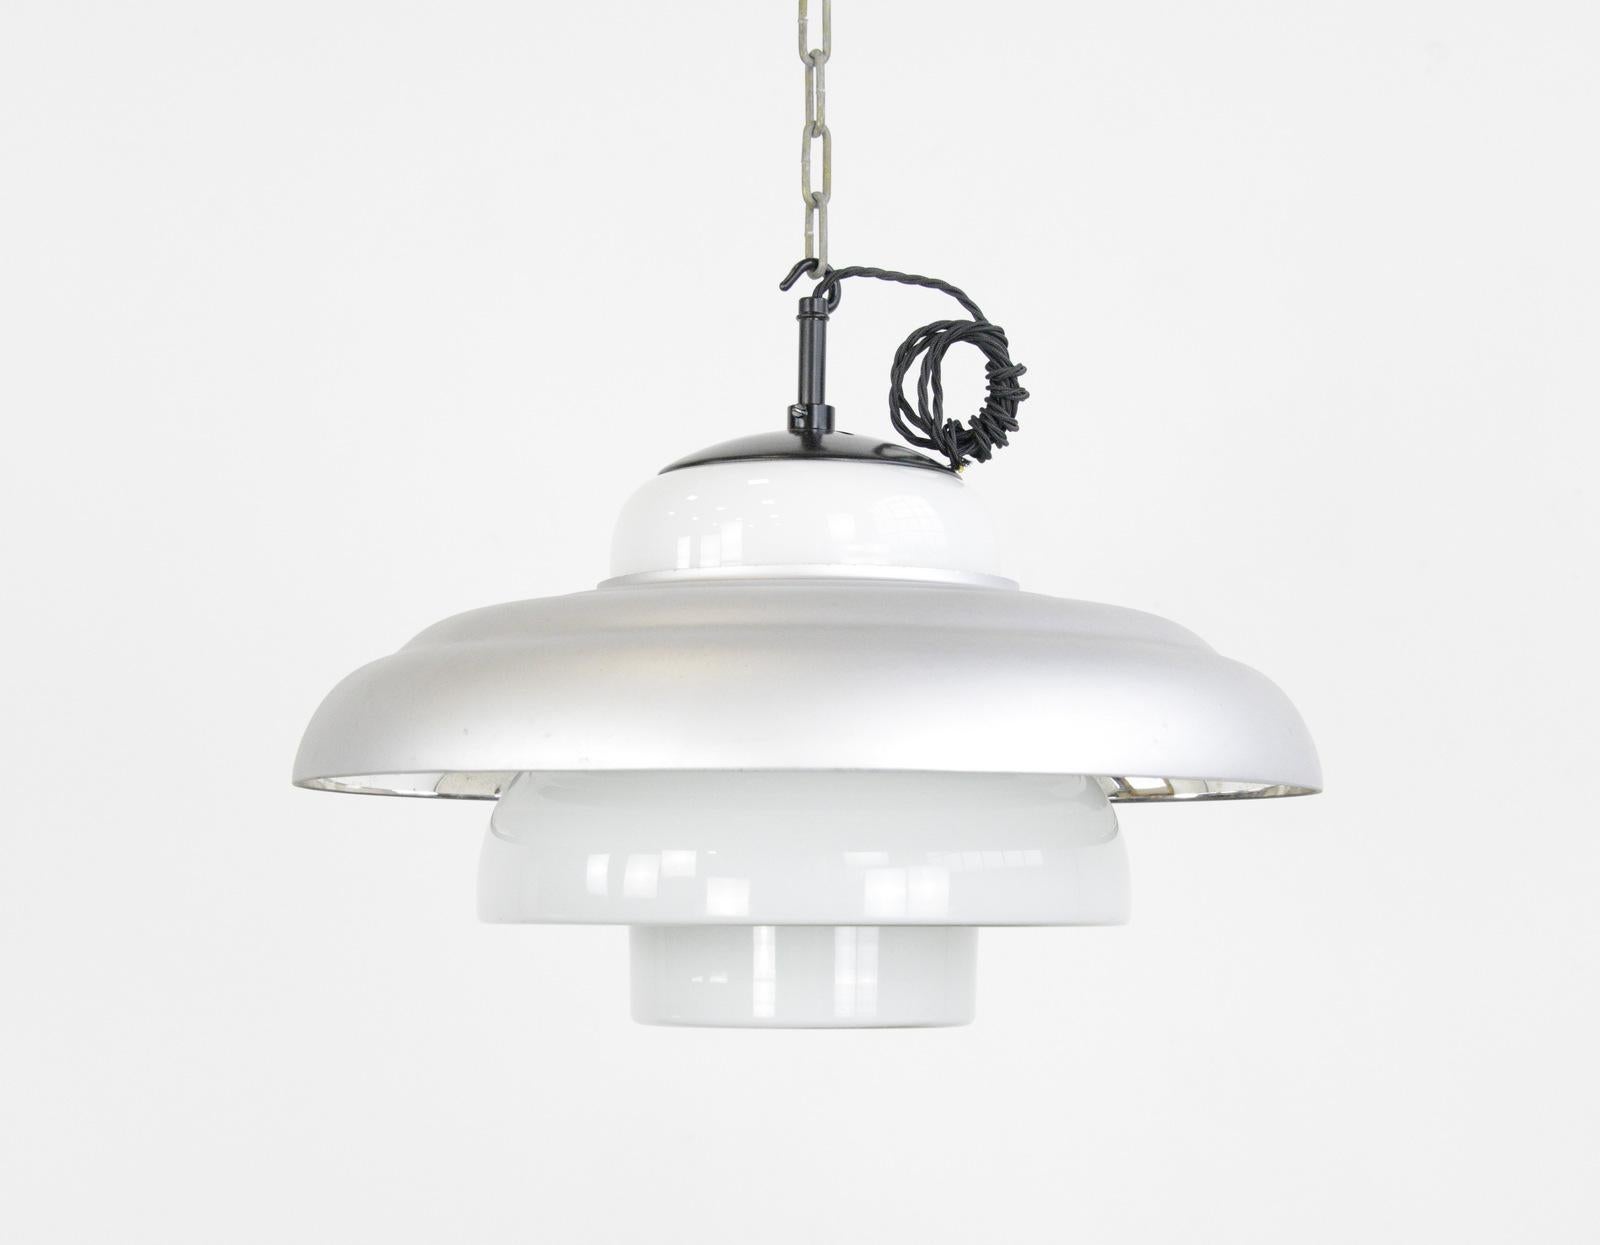 Bauhaus pendant light by Mithras, circa 1930s

- Beehive shaped opaline glass with spiral detail at the bottom
- Mercury glass outer ring
- Takes E27 fitting bulbs
- Comes with 100cm of black braided cable 
- Comes with 100cm of chain and